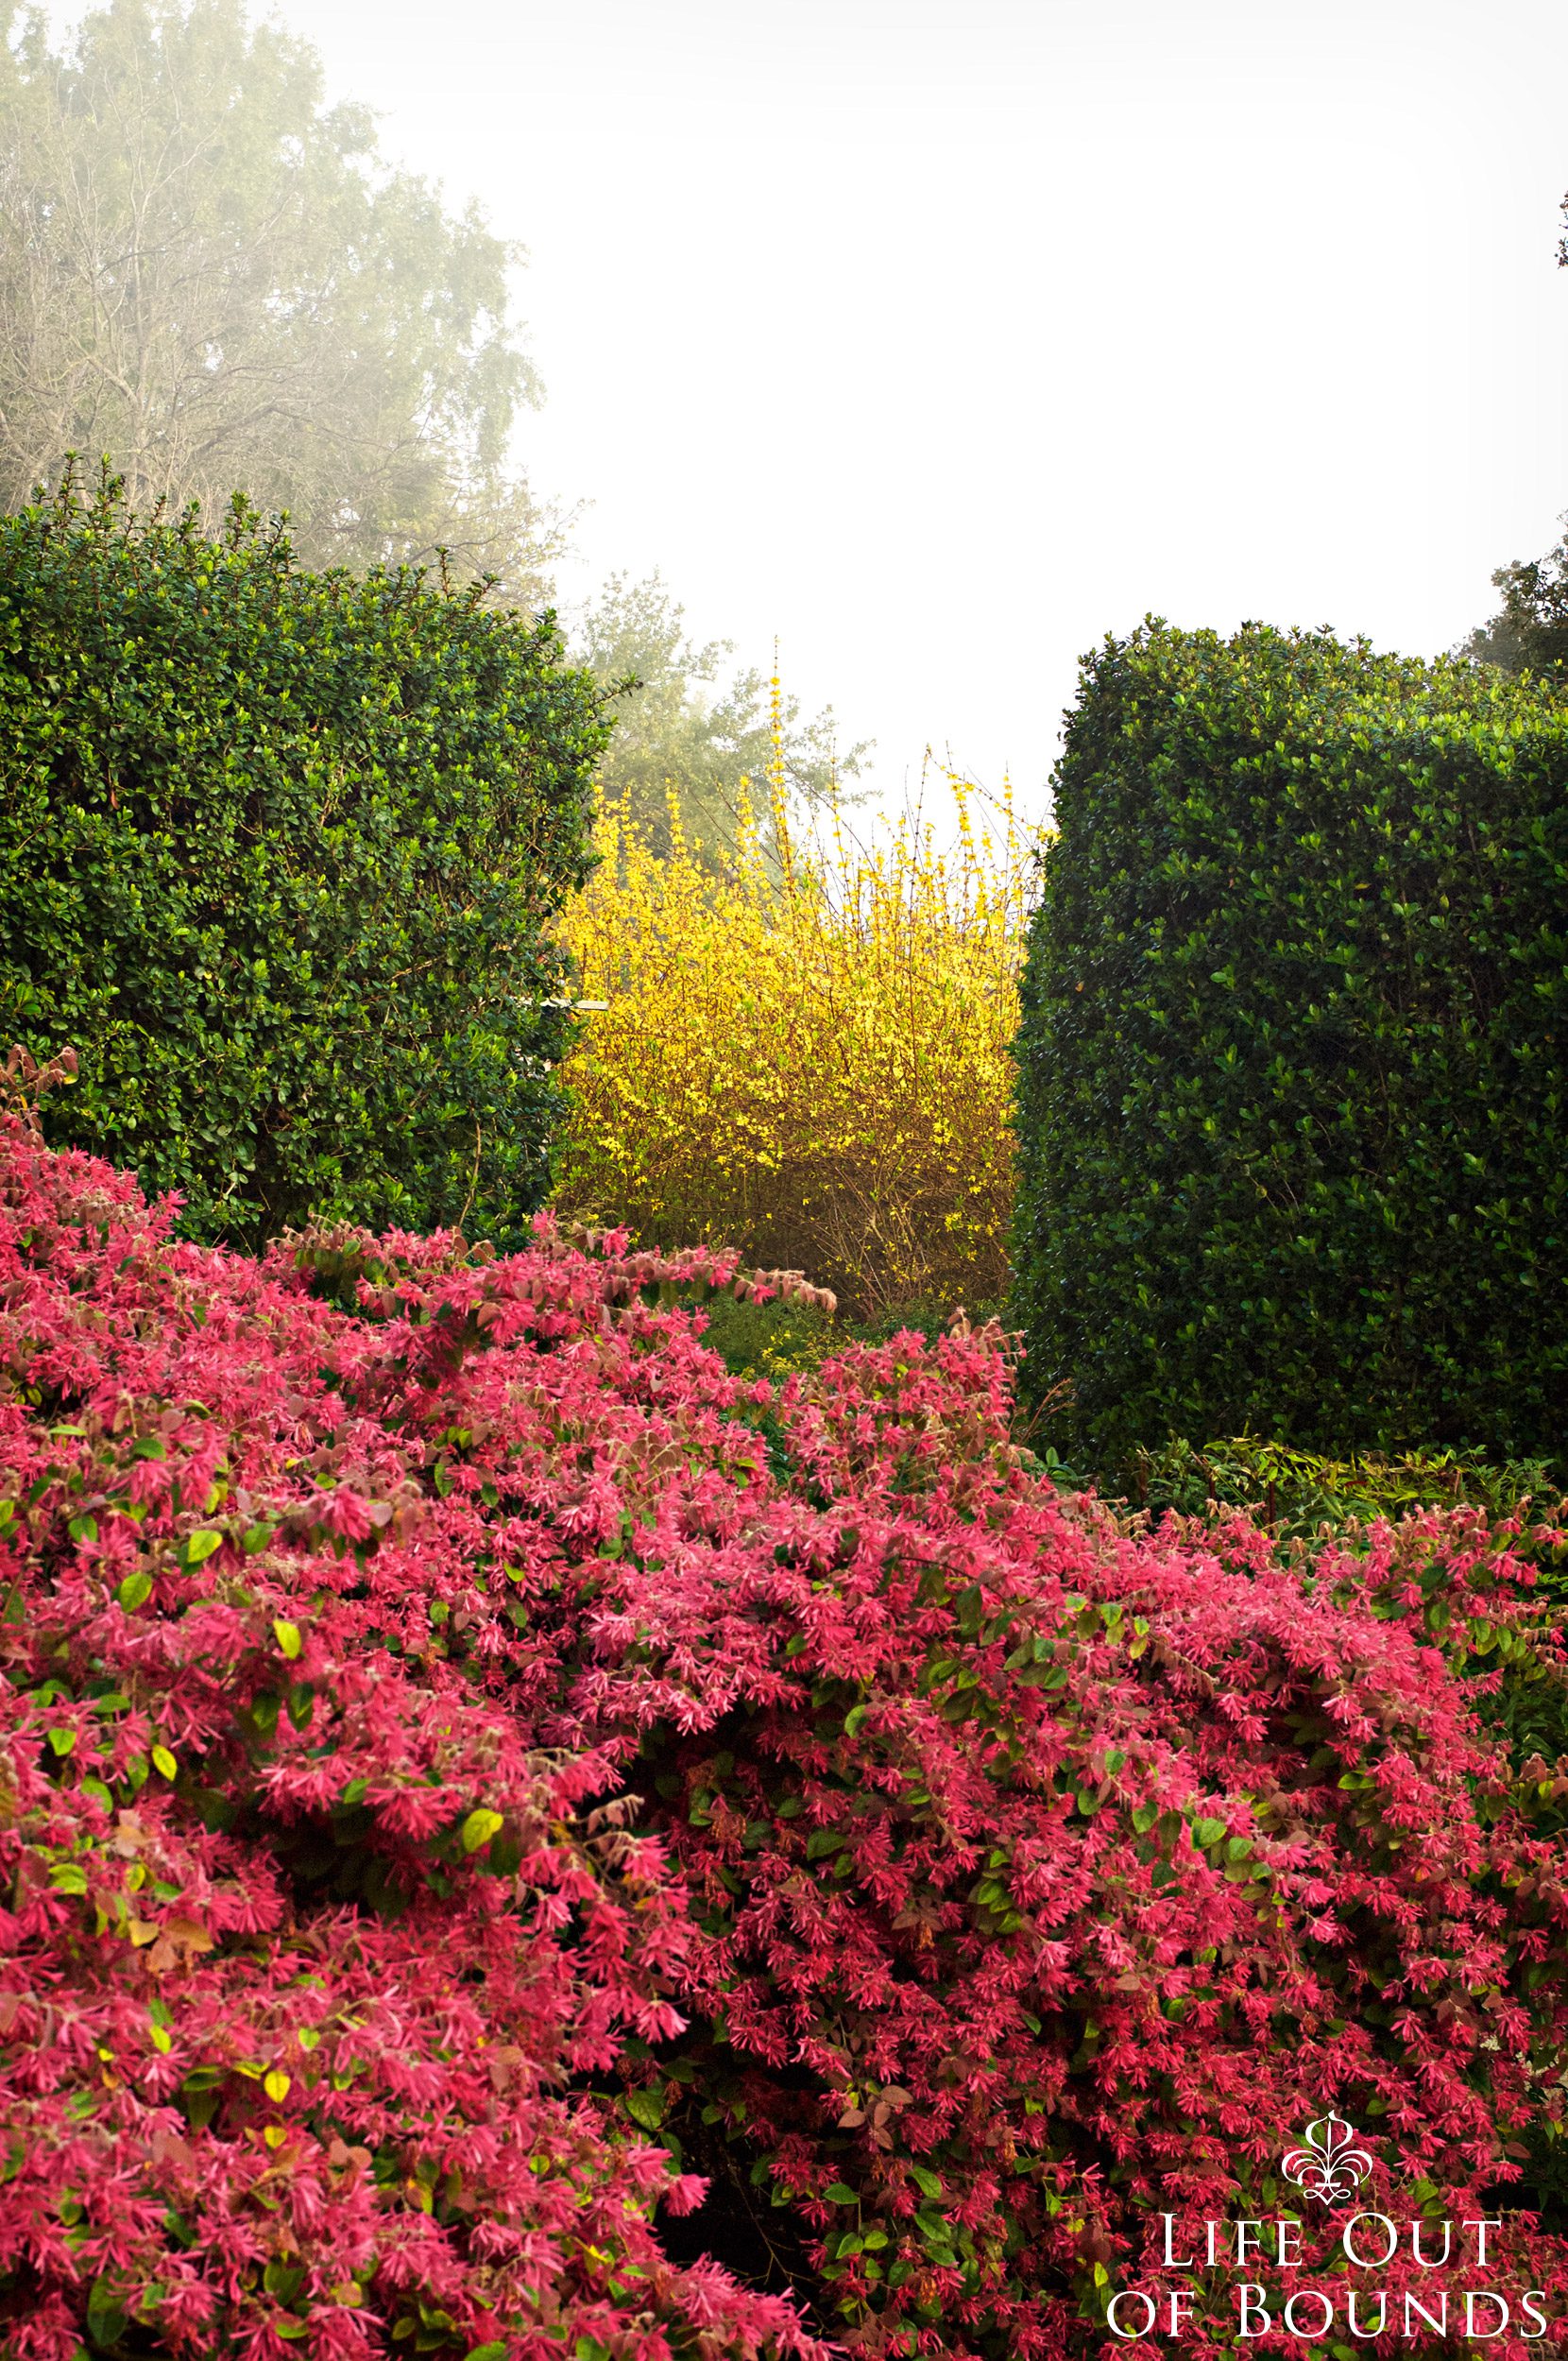 Layers-of-colors-in-the-early-spring-garden-in-the-fog-Napa-California